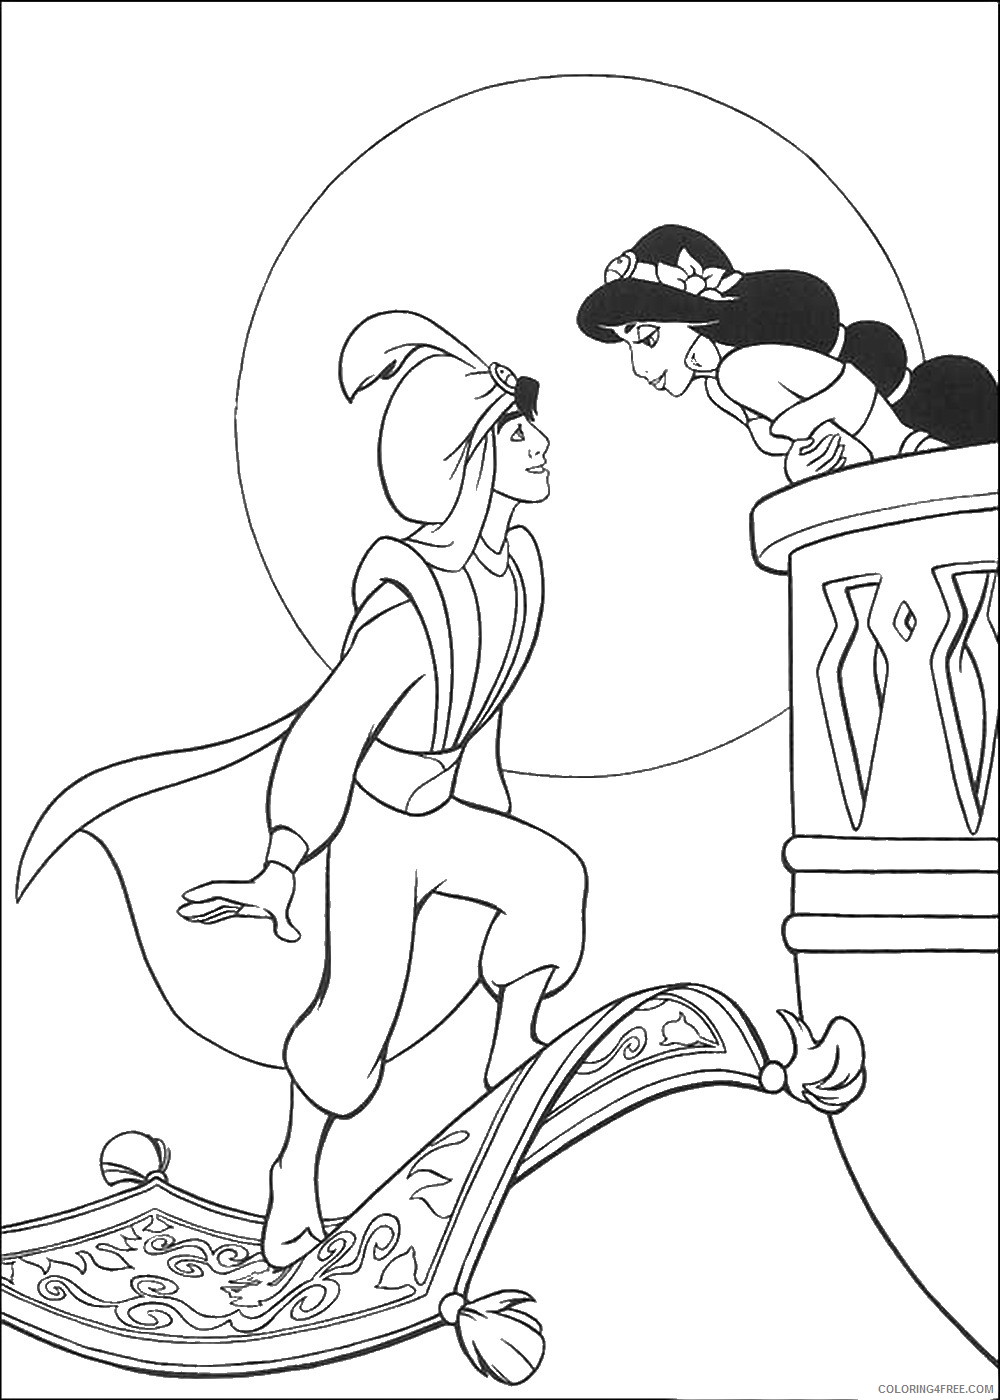 Aladdin Coloring Pages Cartoons aladdin_25 Printable 2020 0303 Coloring4free